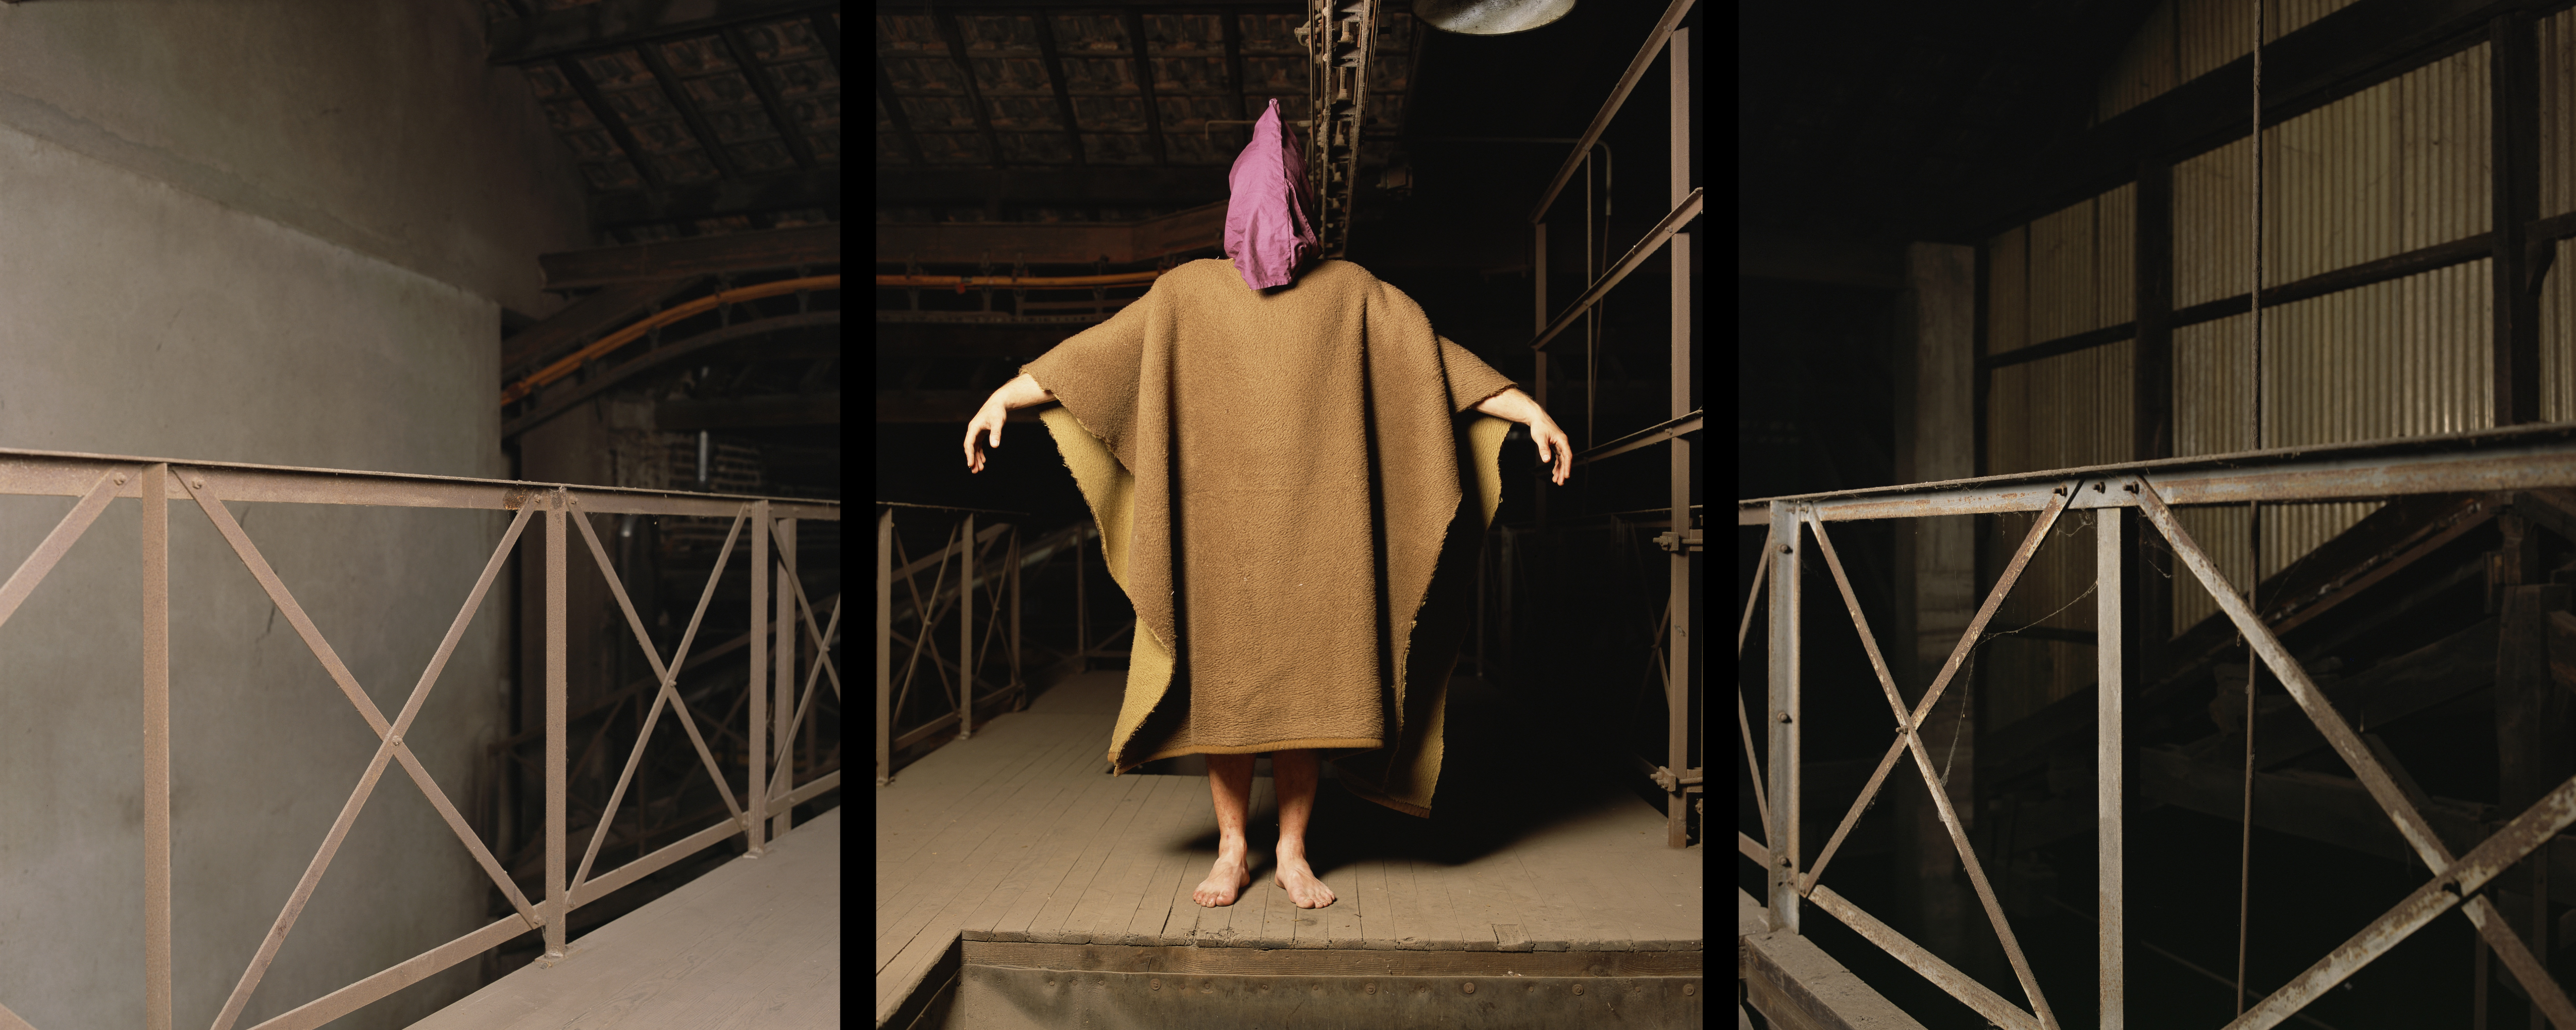 A triptych by the artist Andres Serrano depicting a hooded figure clothed in a rag in the central image. The figure is holding their arms up to form a cross whilst standing in the middle of a raised walkway. The exterior is of a dark factory setting.